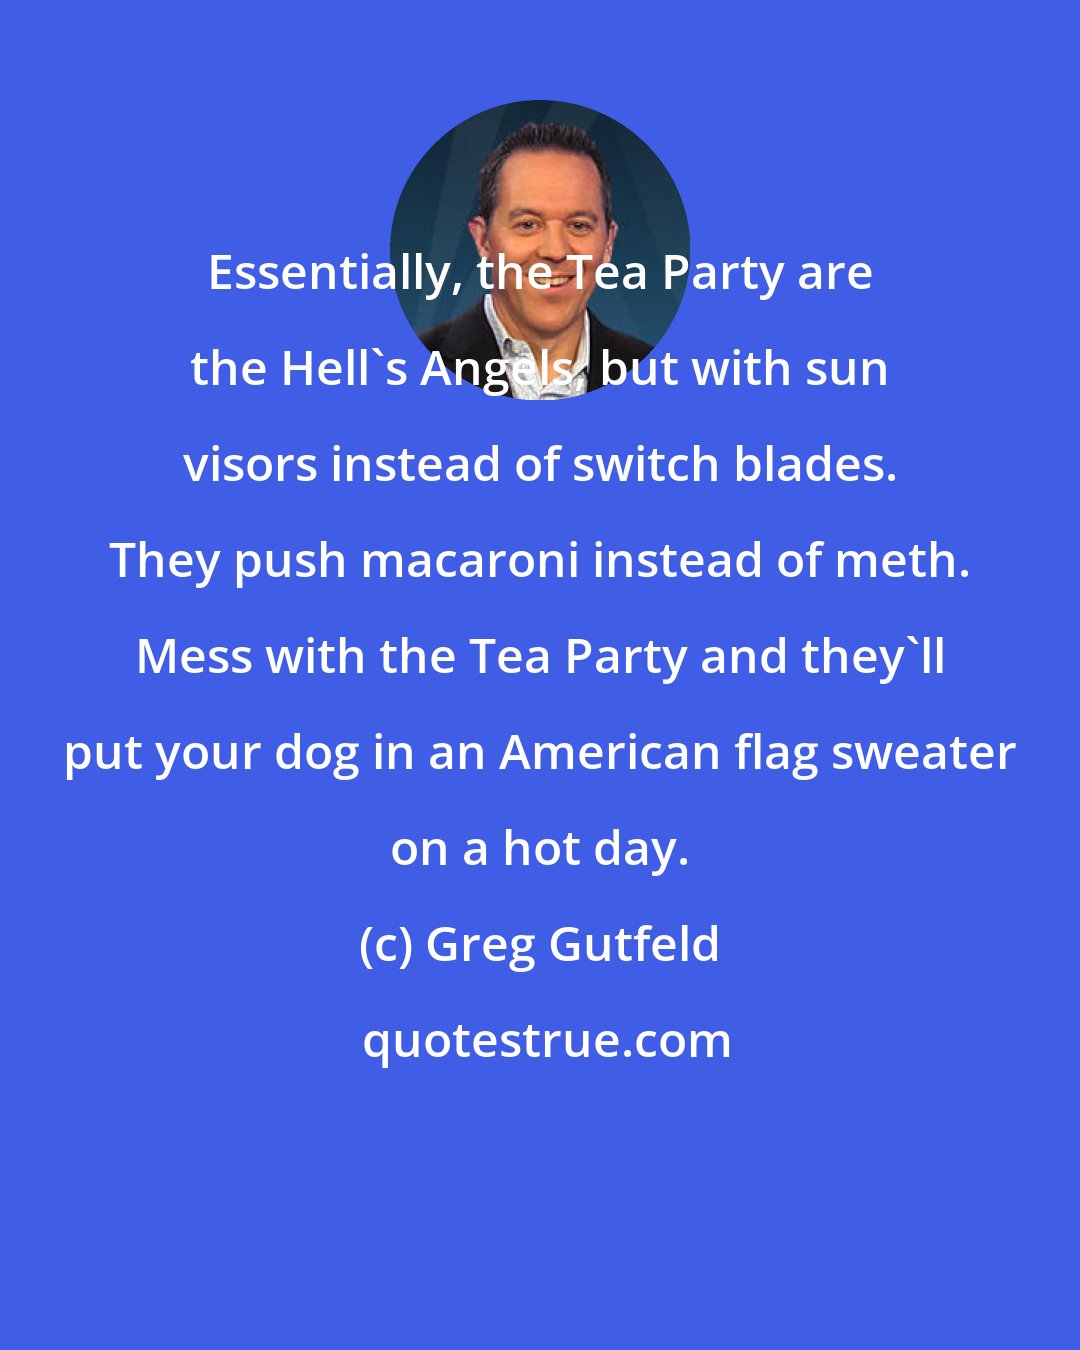 Greg Gutfeld: Essentially, the Tea Party are the Hell's Angels, but with sun visors instead of switch blades. They push macaroni instead of meth. Mess with the Tea Party and they'll put your dog in an American flag sweater on a hot day.